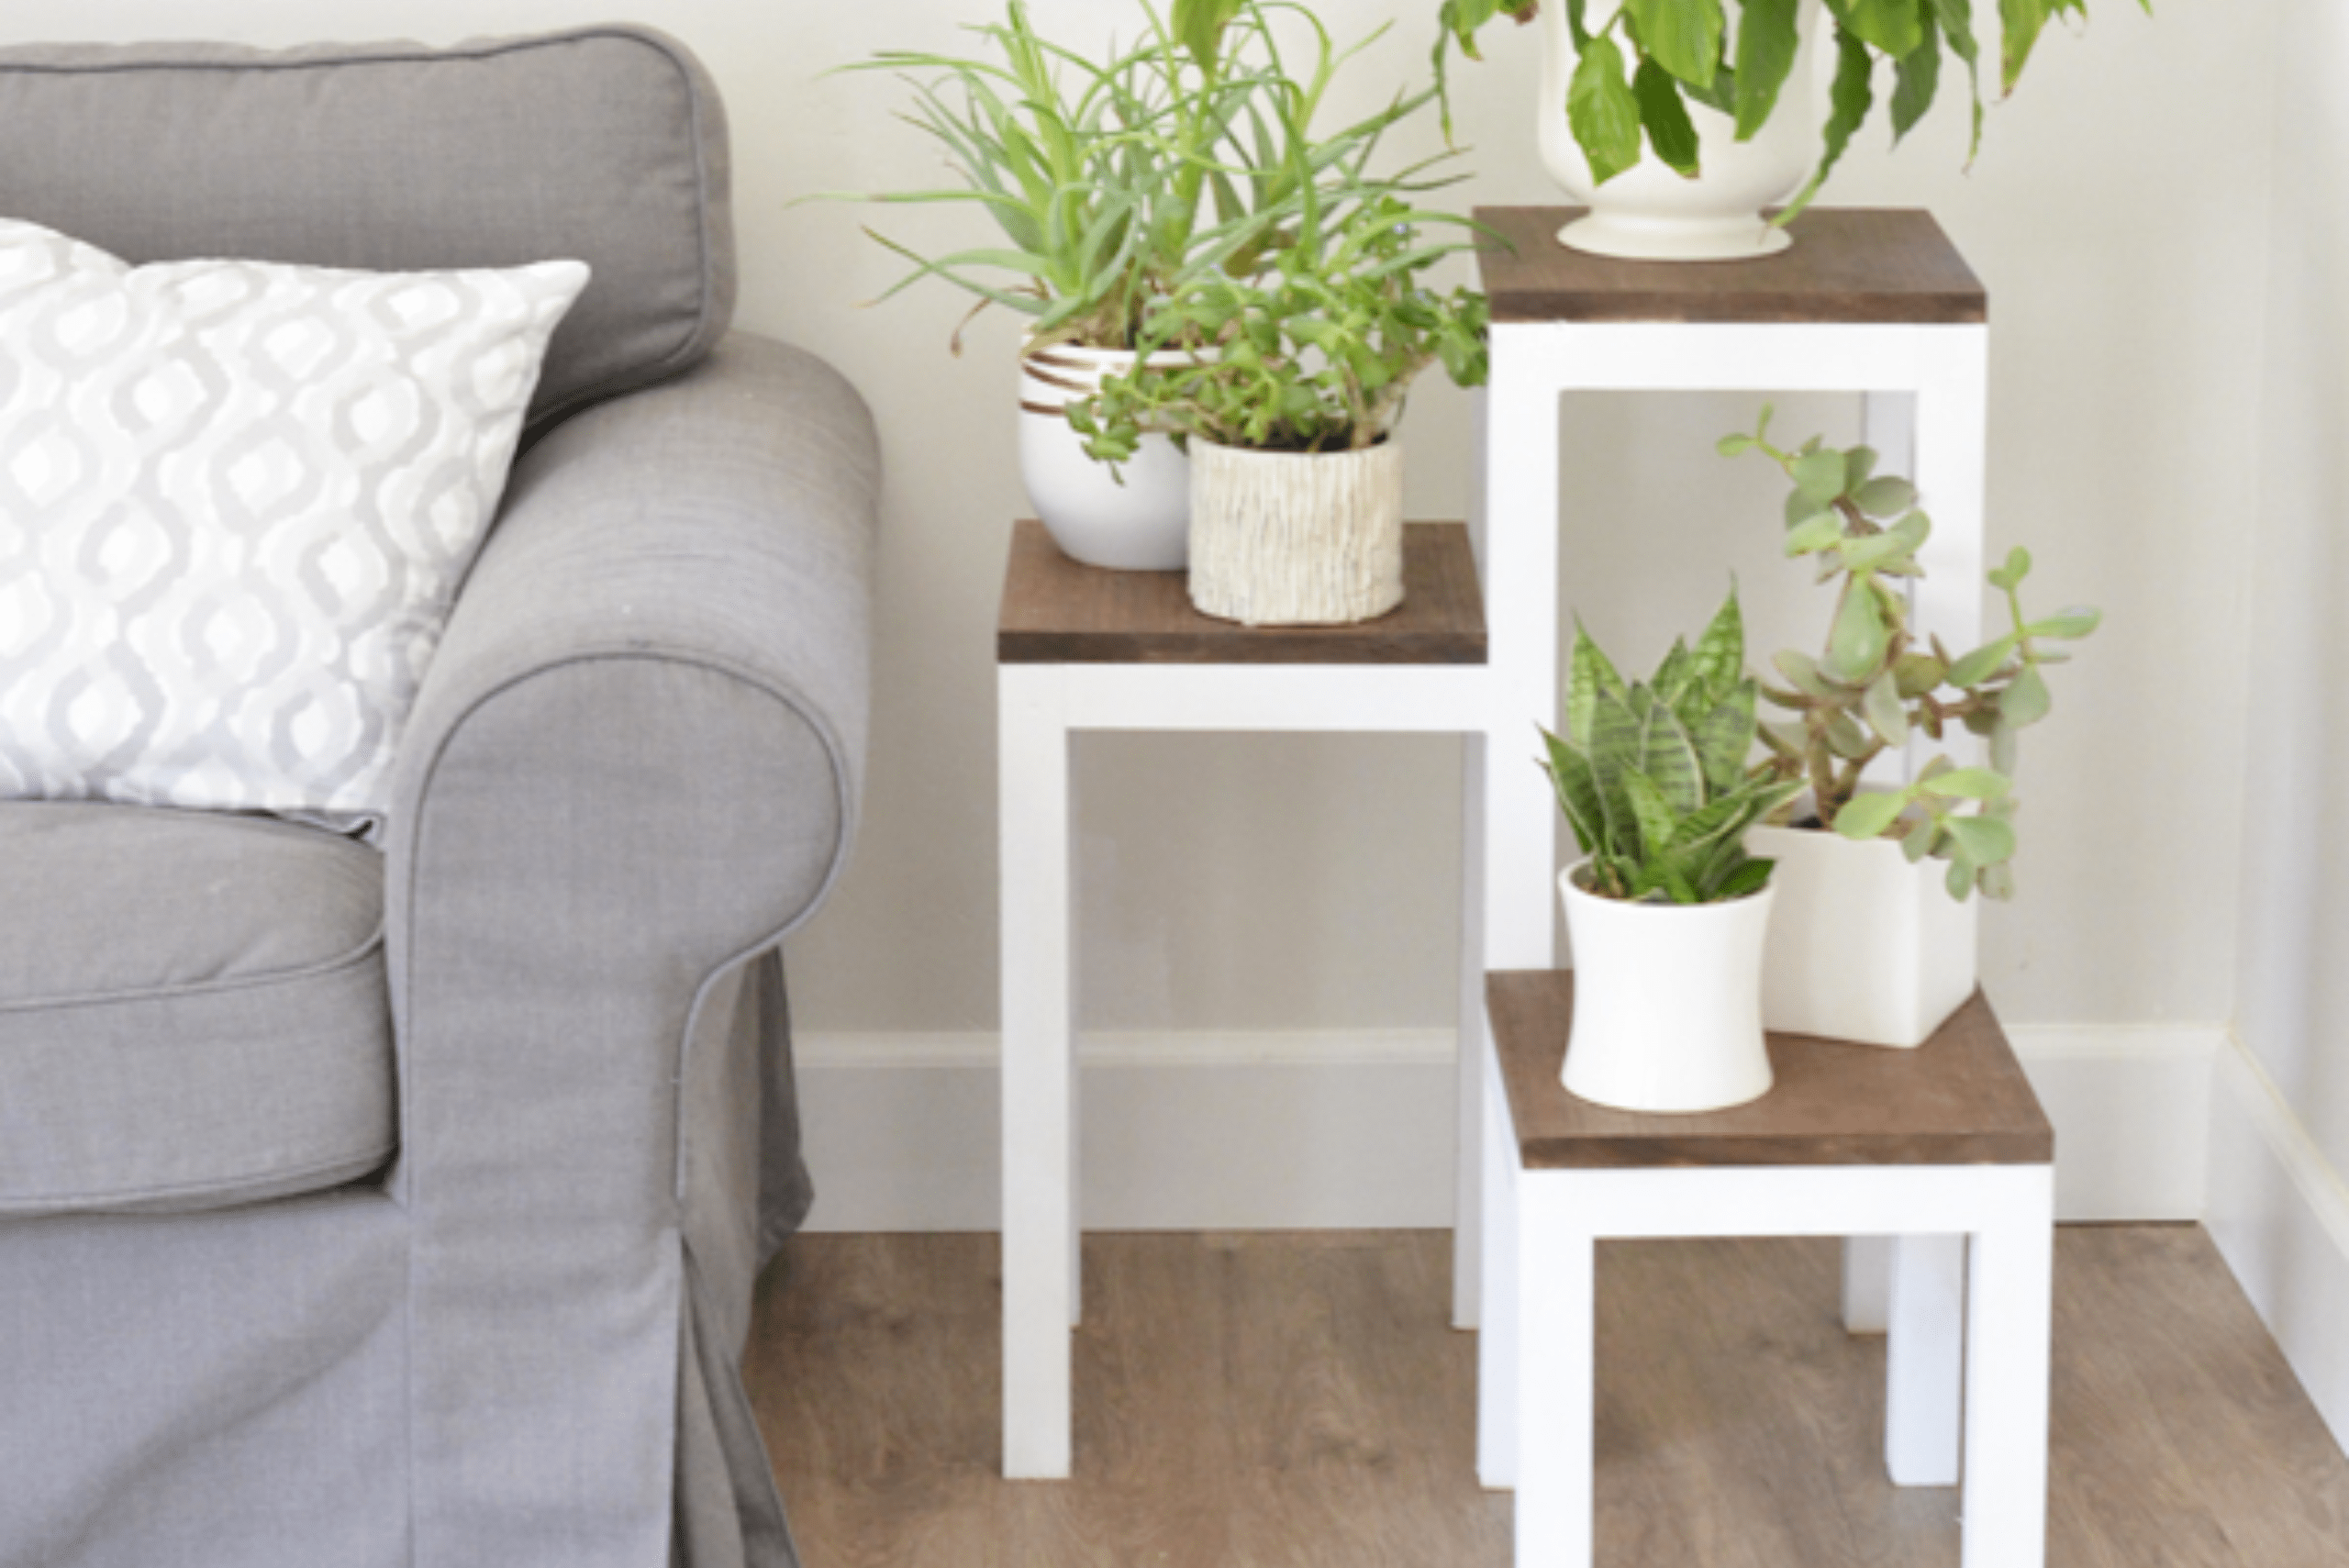 Three plant stands with white legs and wooden tops holding plants.